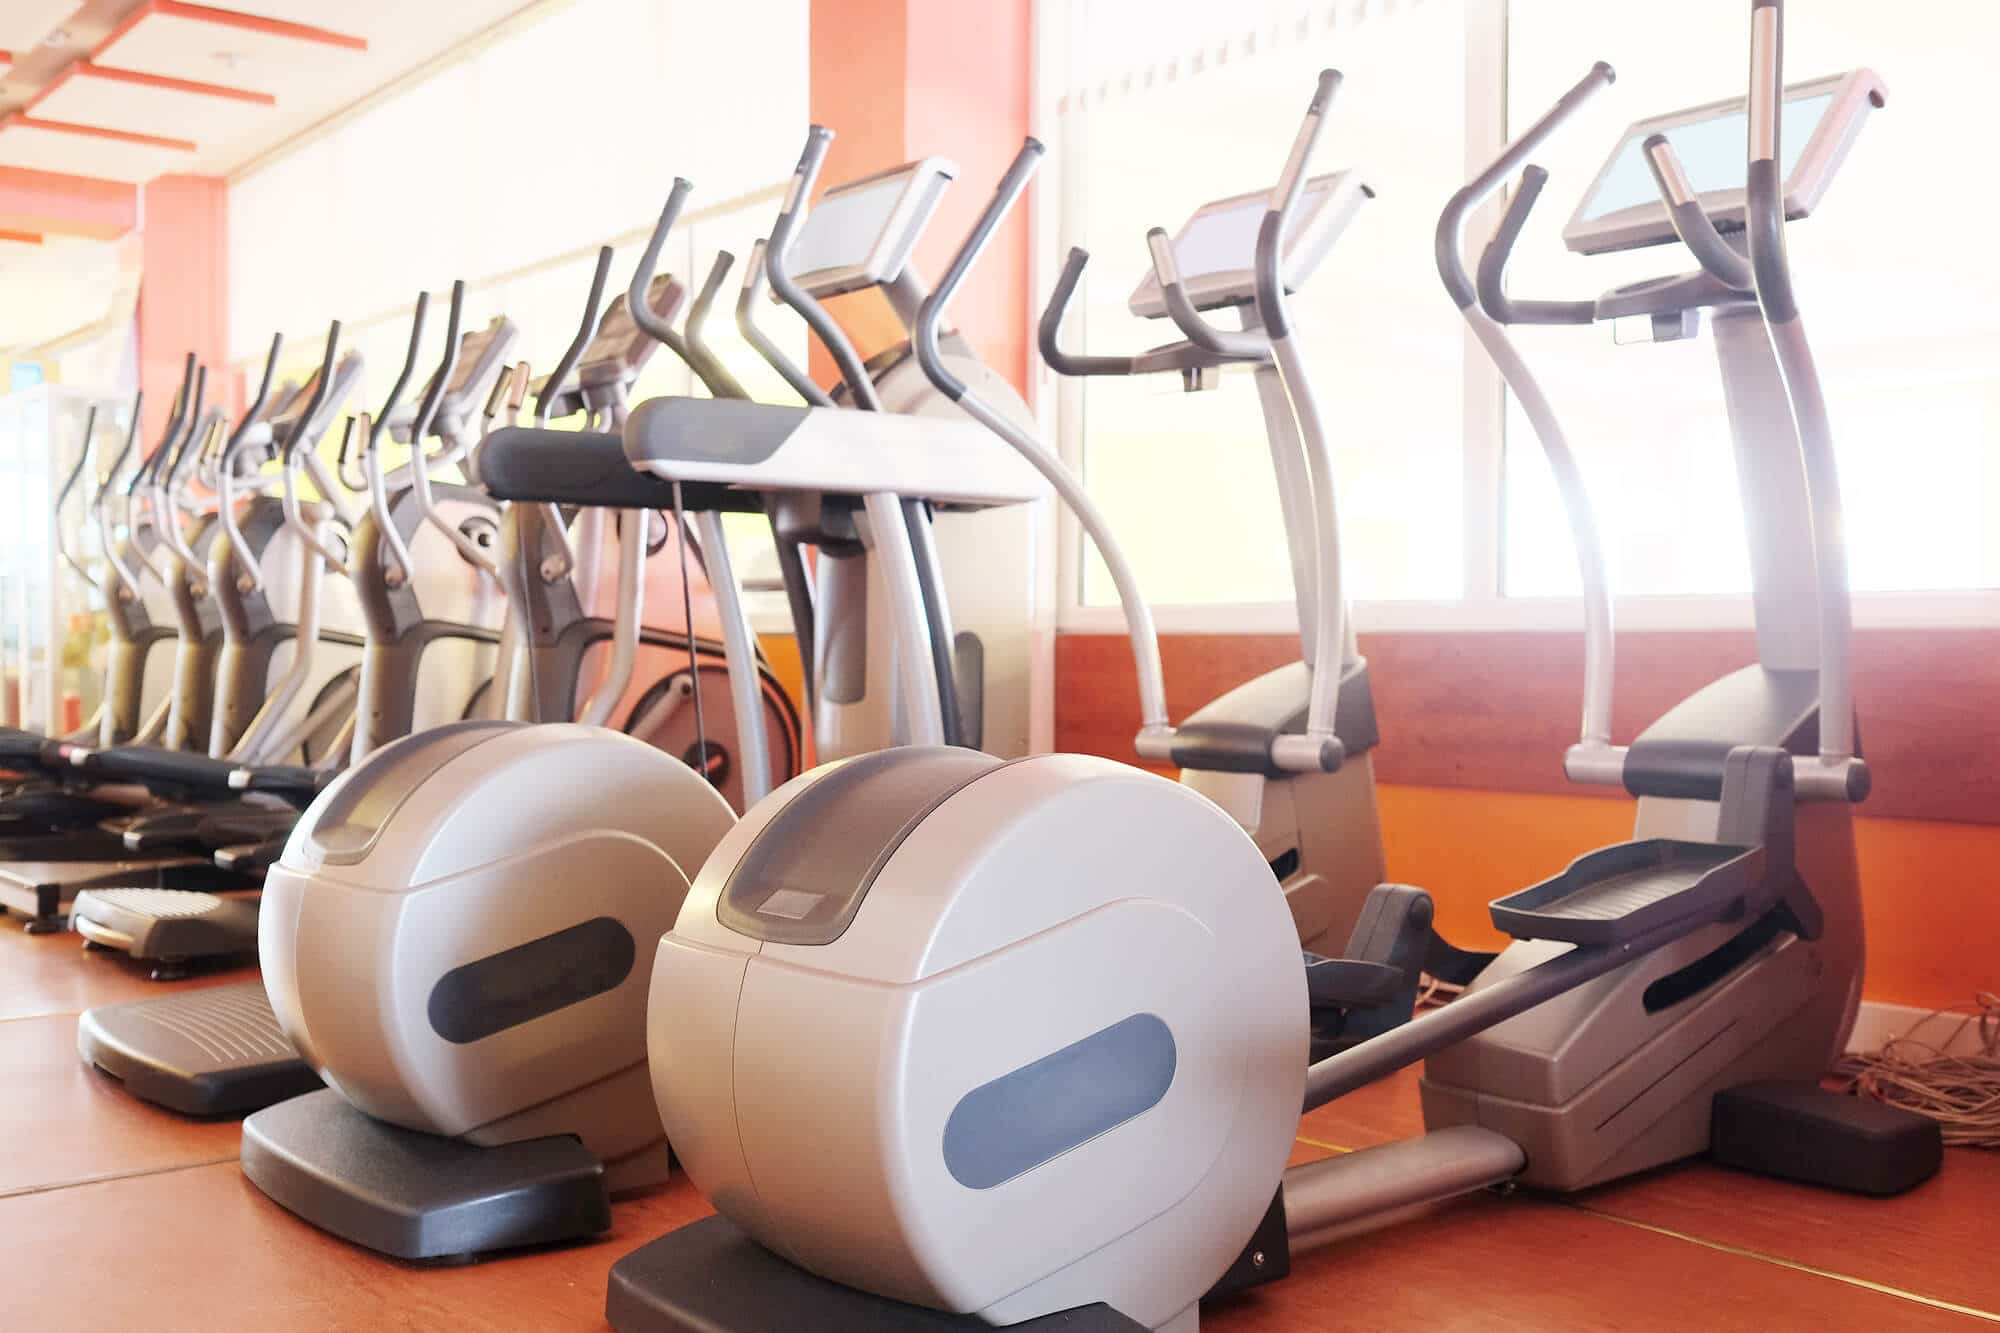 The Ultimate Guide on How to Tone Your Muscles and Lose Weight Fast With an Elliptical Machine